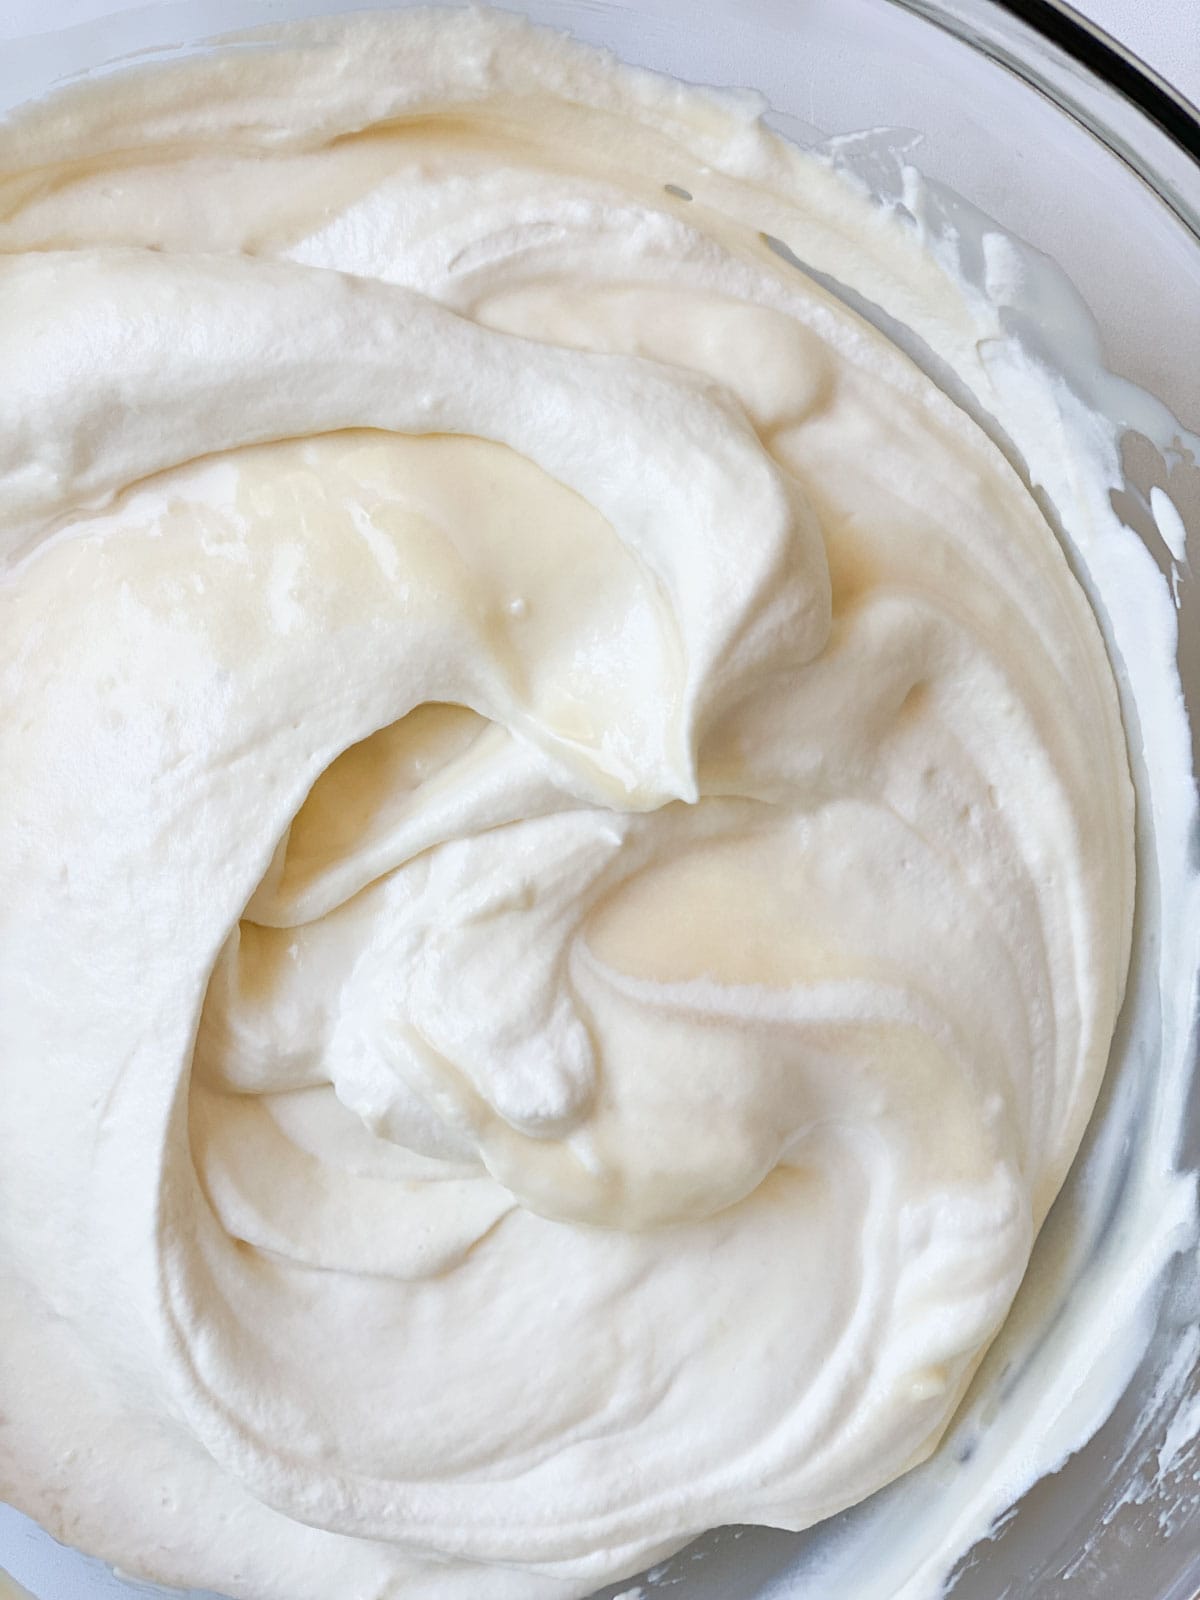 Whipping cream combined with an ice cream base in a bowl.